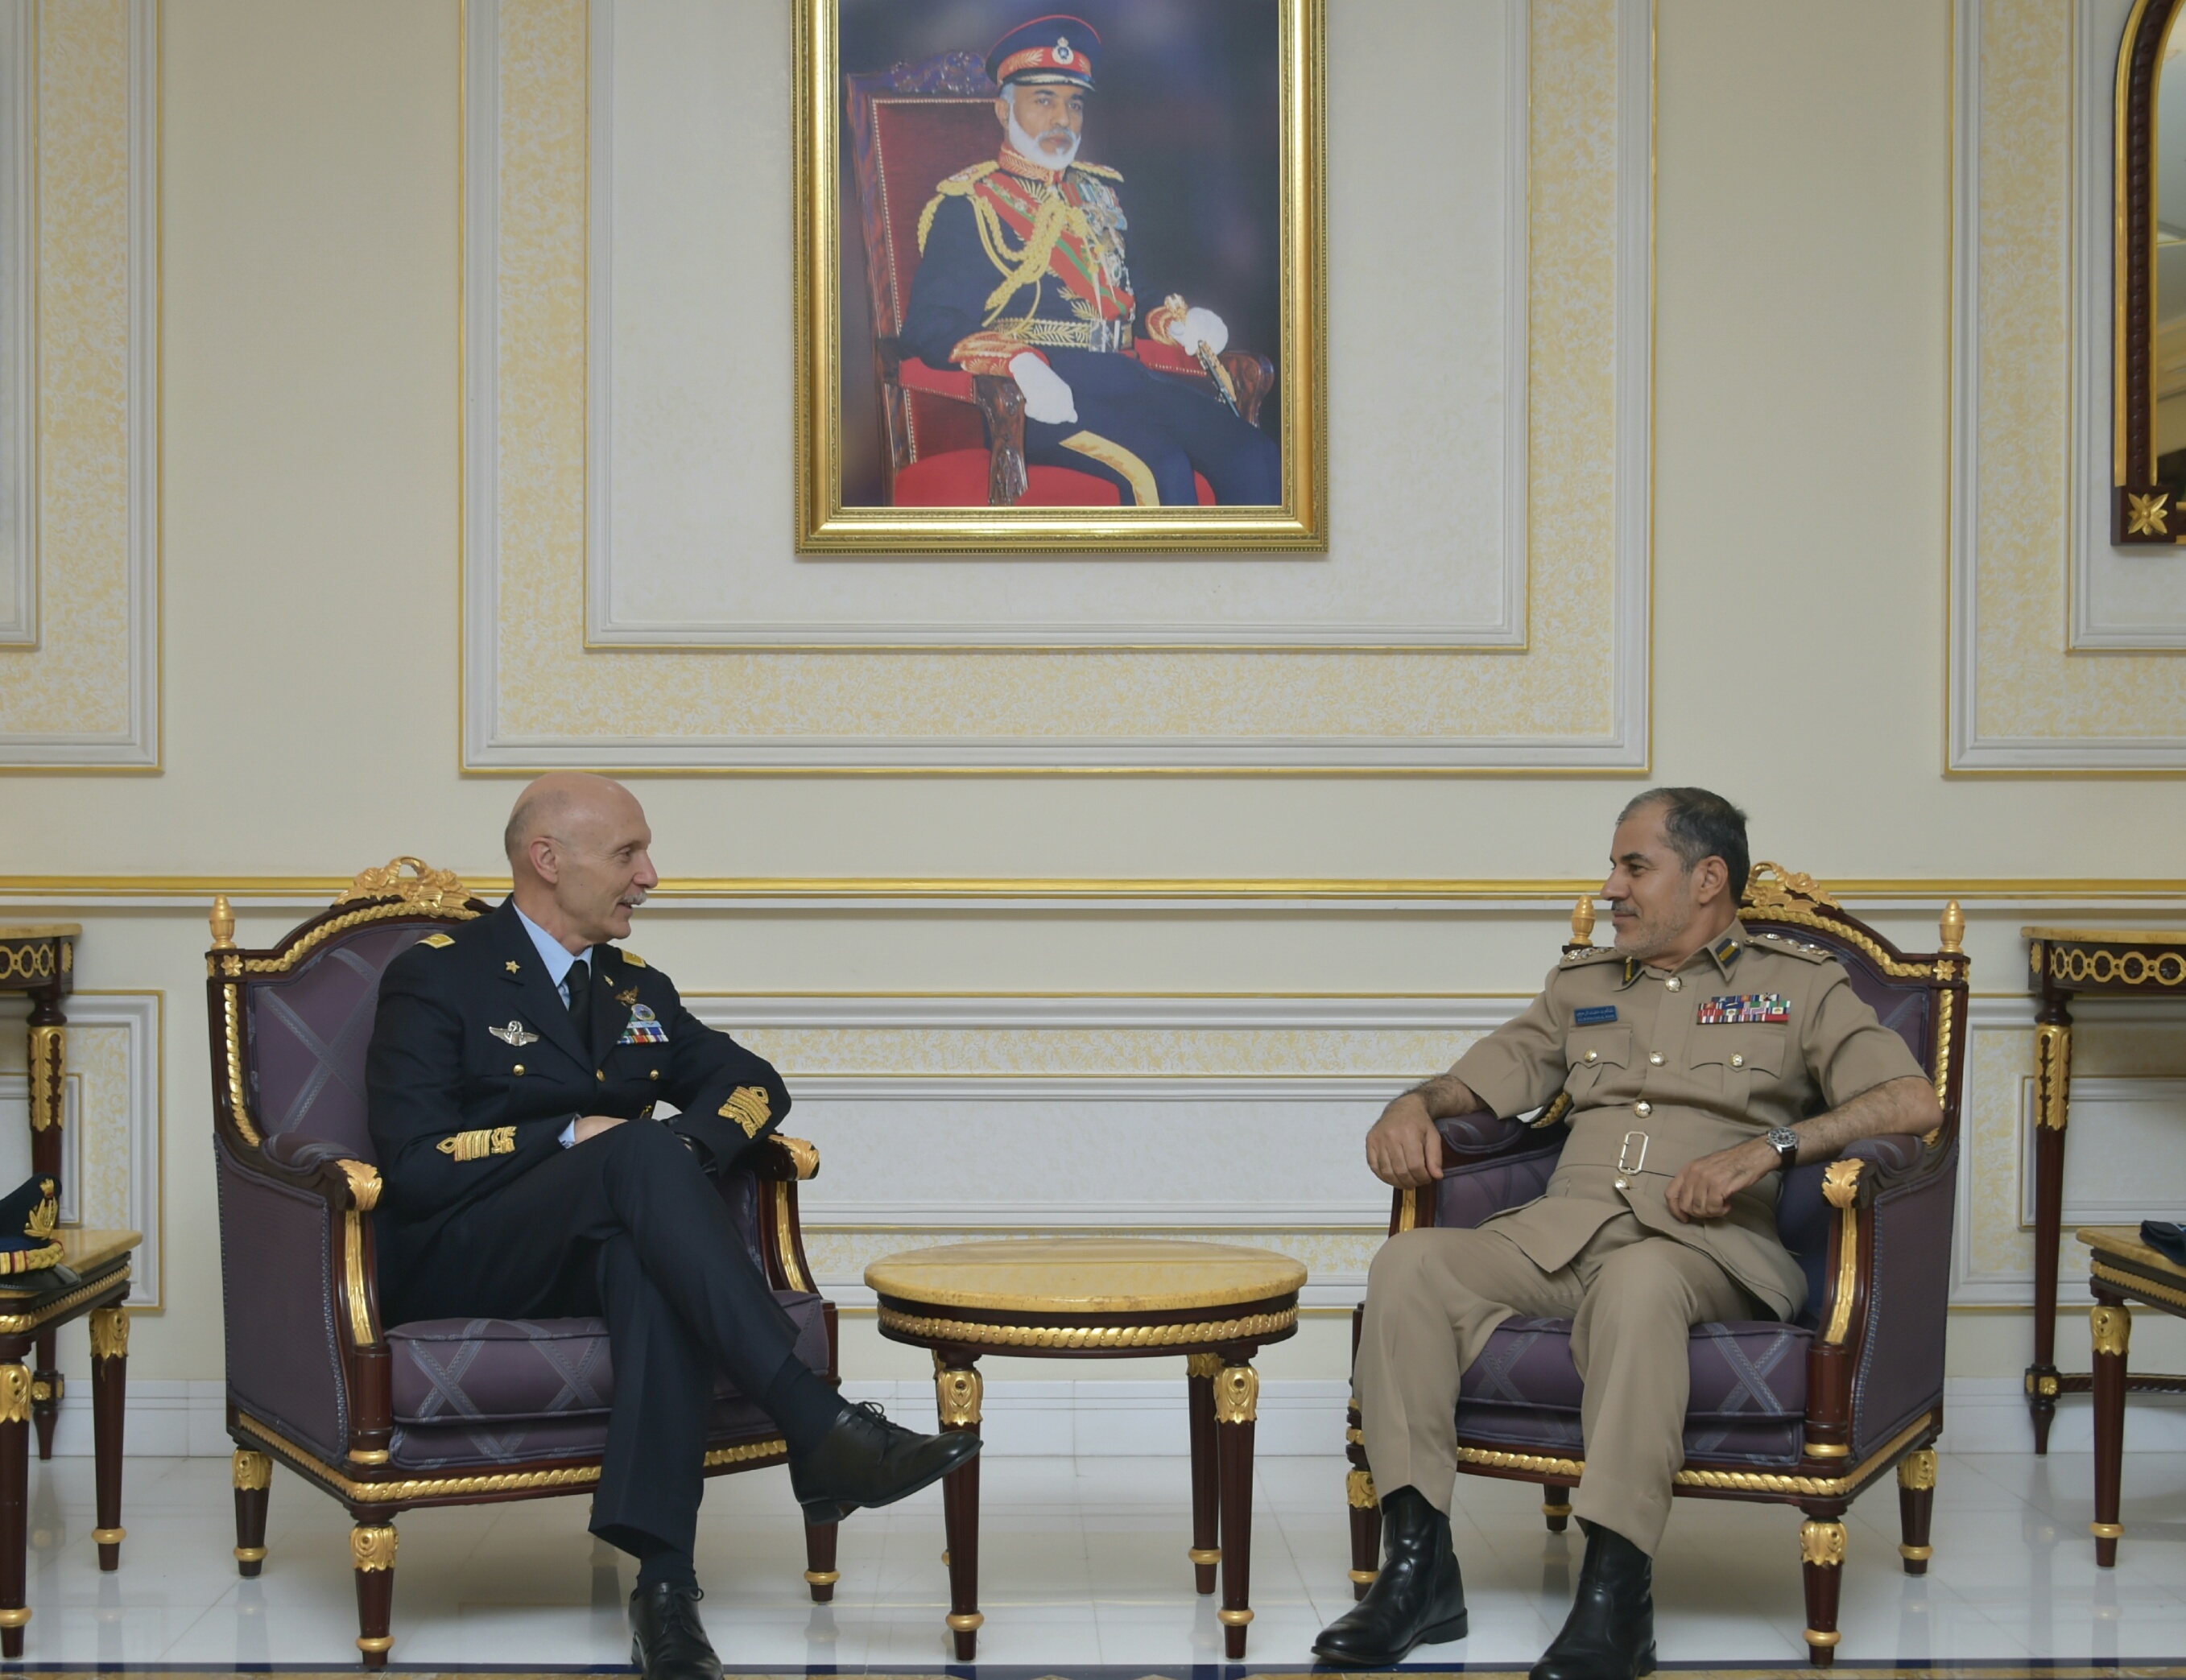 Italian Air Force Chief of Staff arrives in Oman